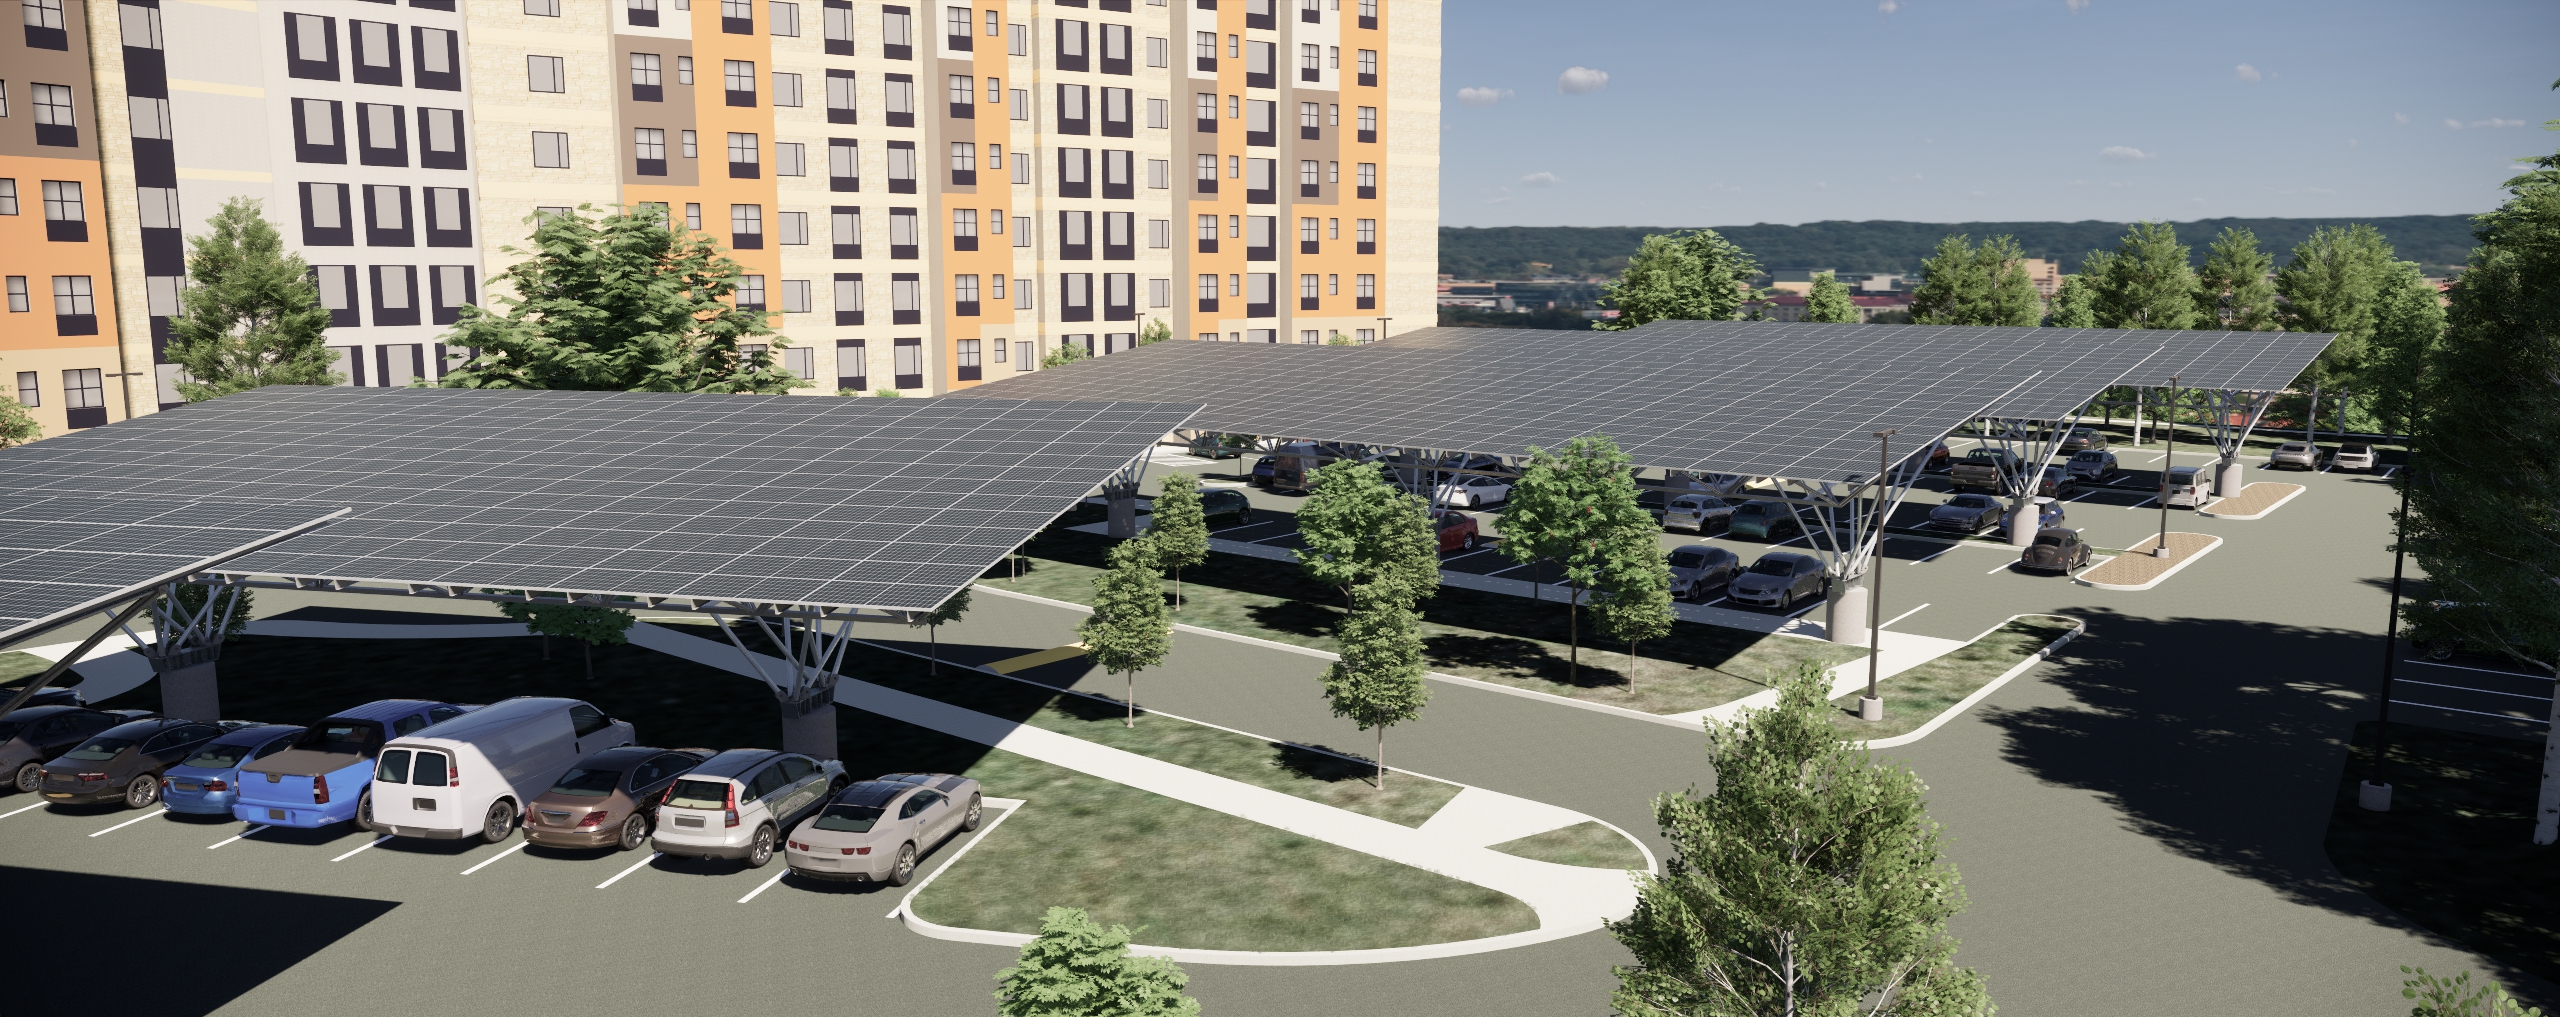 Non-profit group to deploy 2.2 MW rooftop solar on D.C. houses